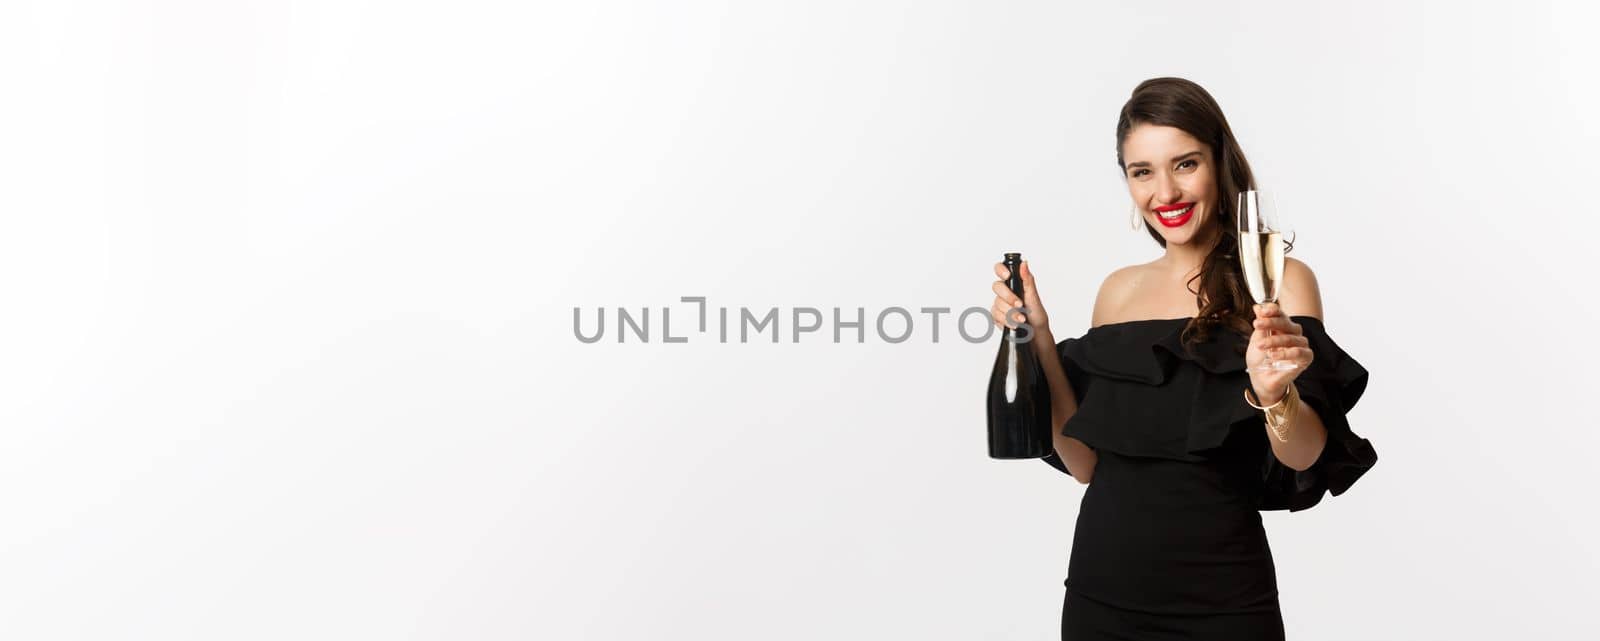 Celebration and party concept. Happy woman enjoying New Year, raising glass of champagne and saying toast, standing in black dress over white background.